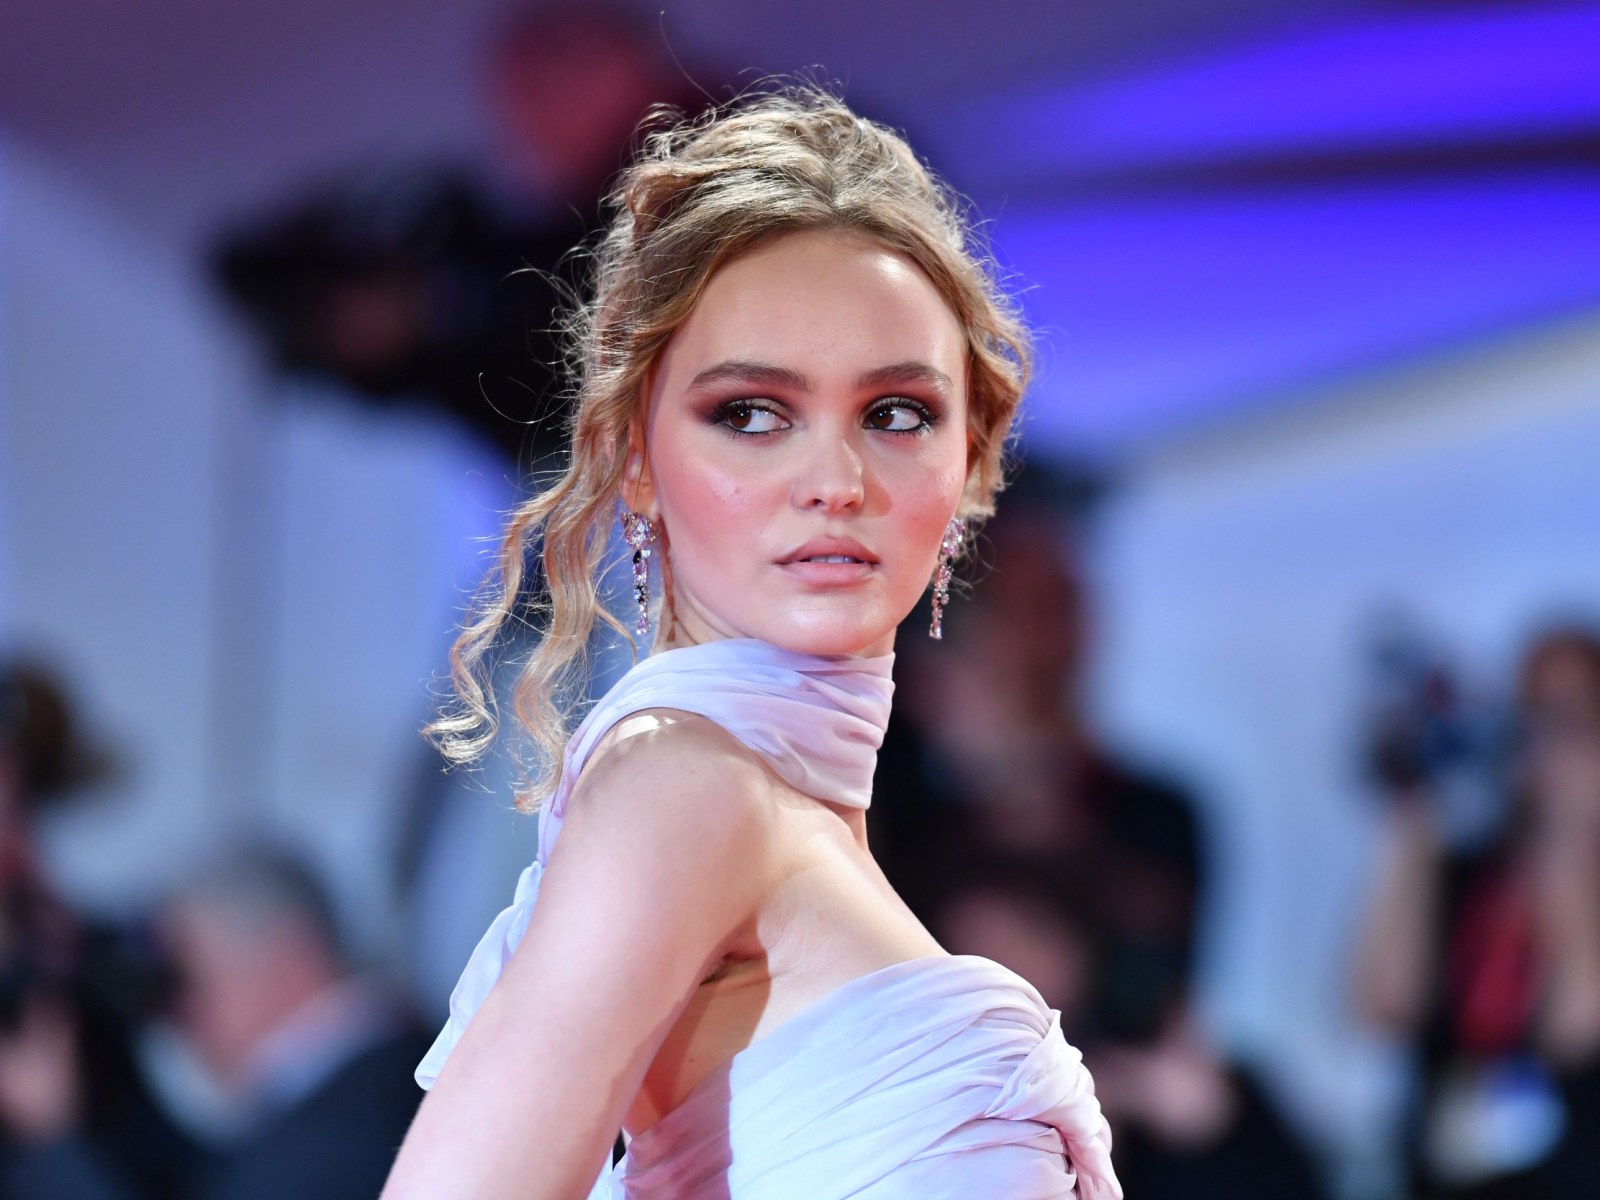 Lily-Rose Depp, Rihanna, and More: Celebrities at Fashion Week